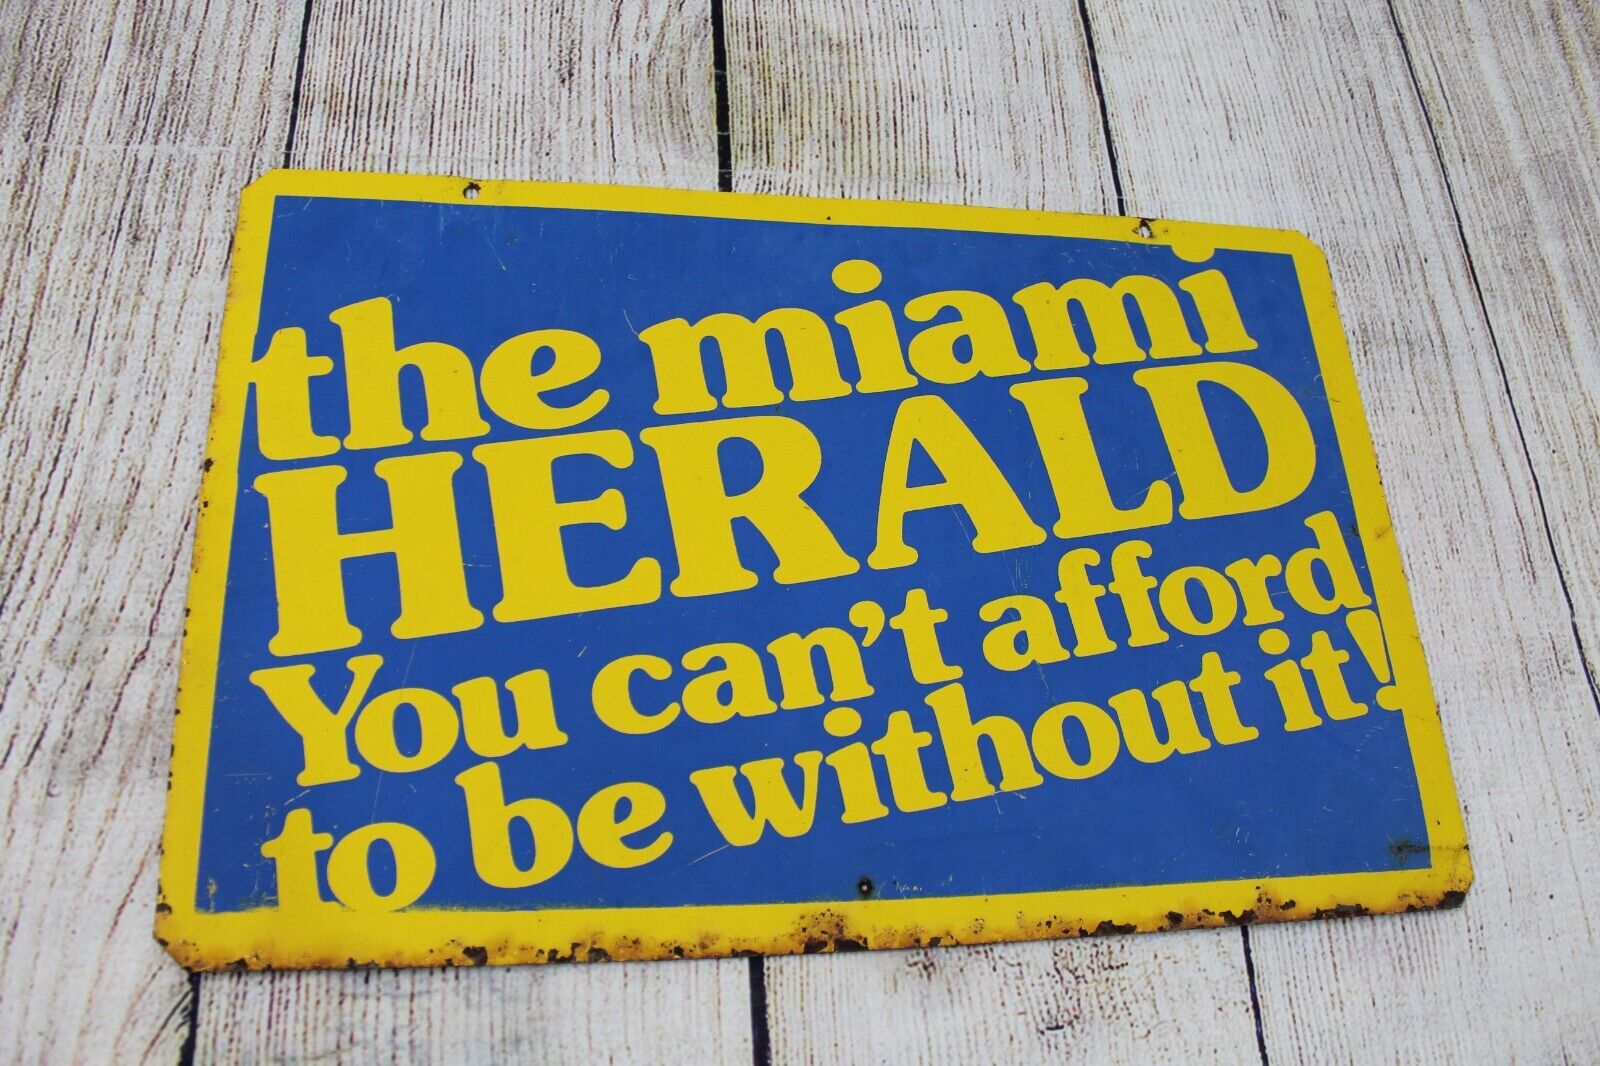 VTG Miami Herald You Can\'t Afford To Be Without It Metal Advertising Sign 17x11